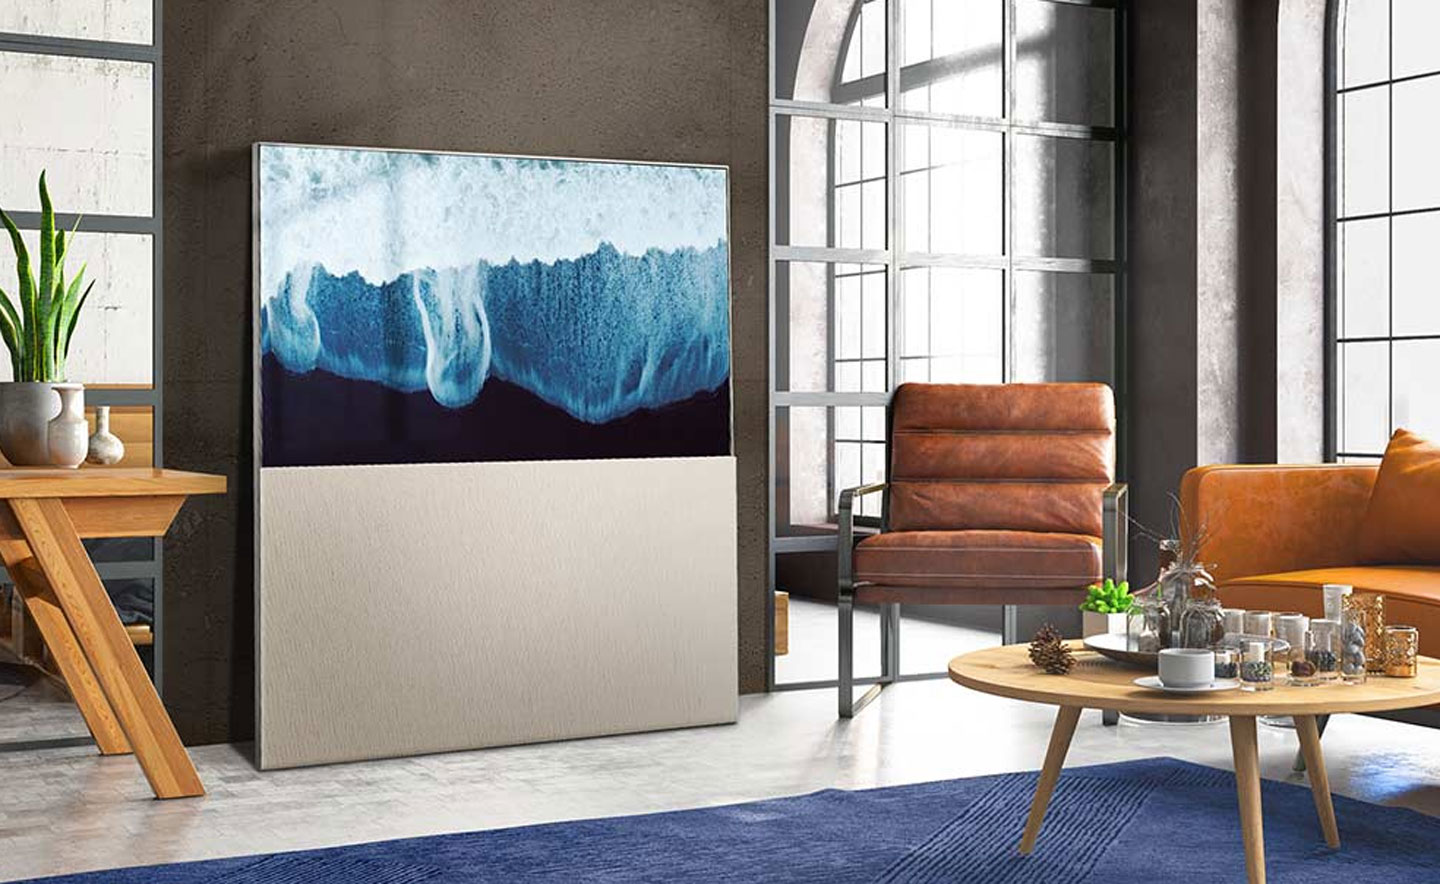 Object Easel also has the wide field of vision of a large-size TV, a unique sliding shell and an integrated display stand, successfully creating a home atmosphere like an art gallery.